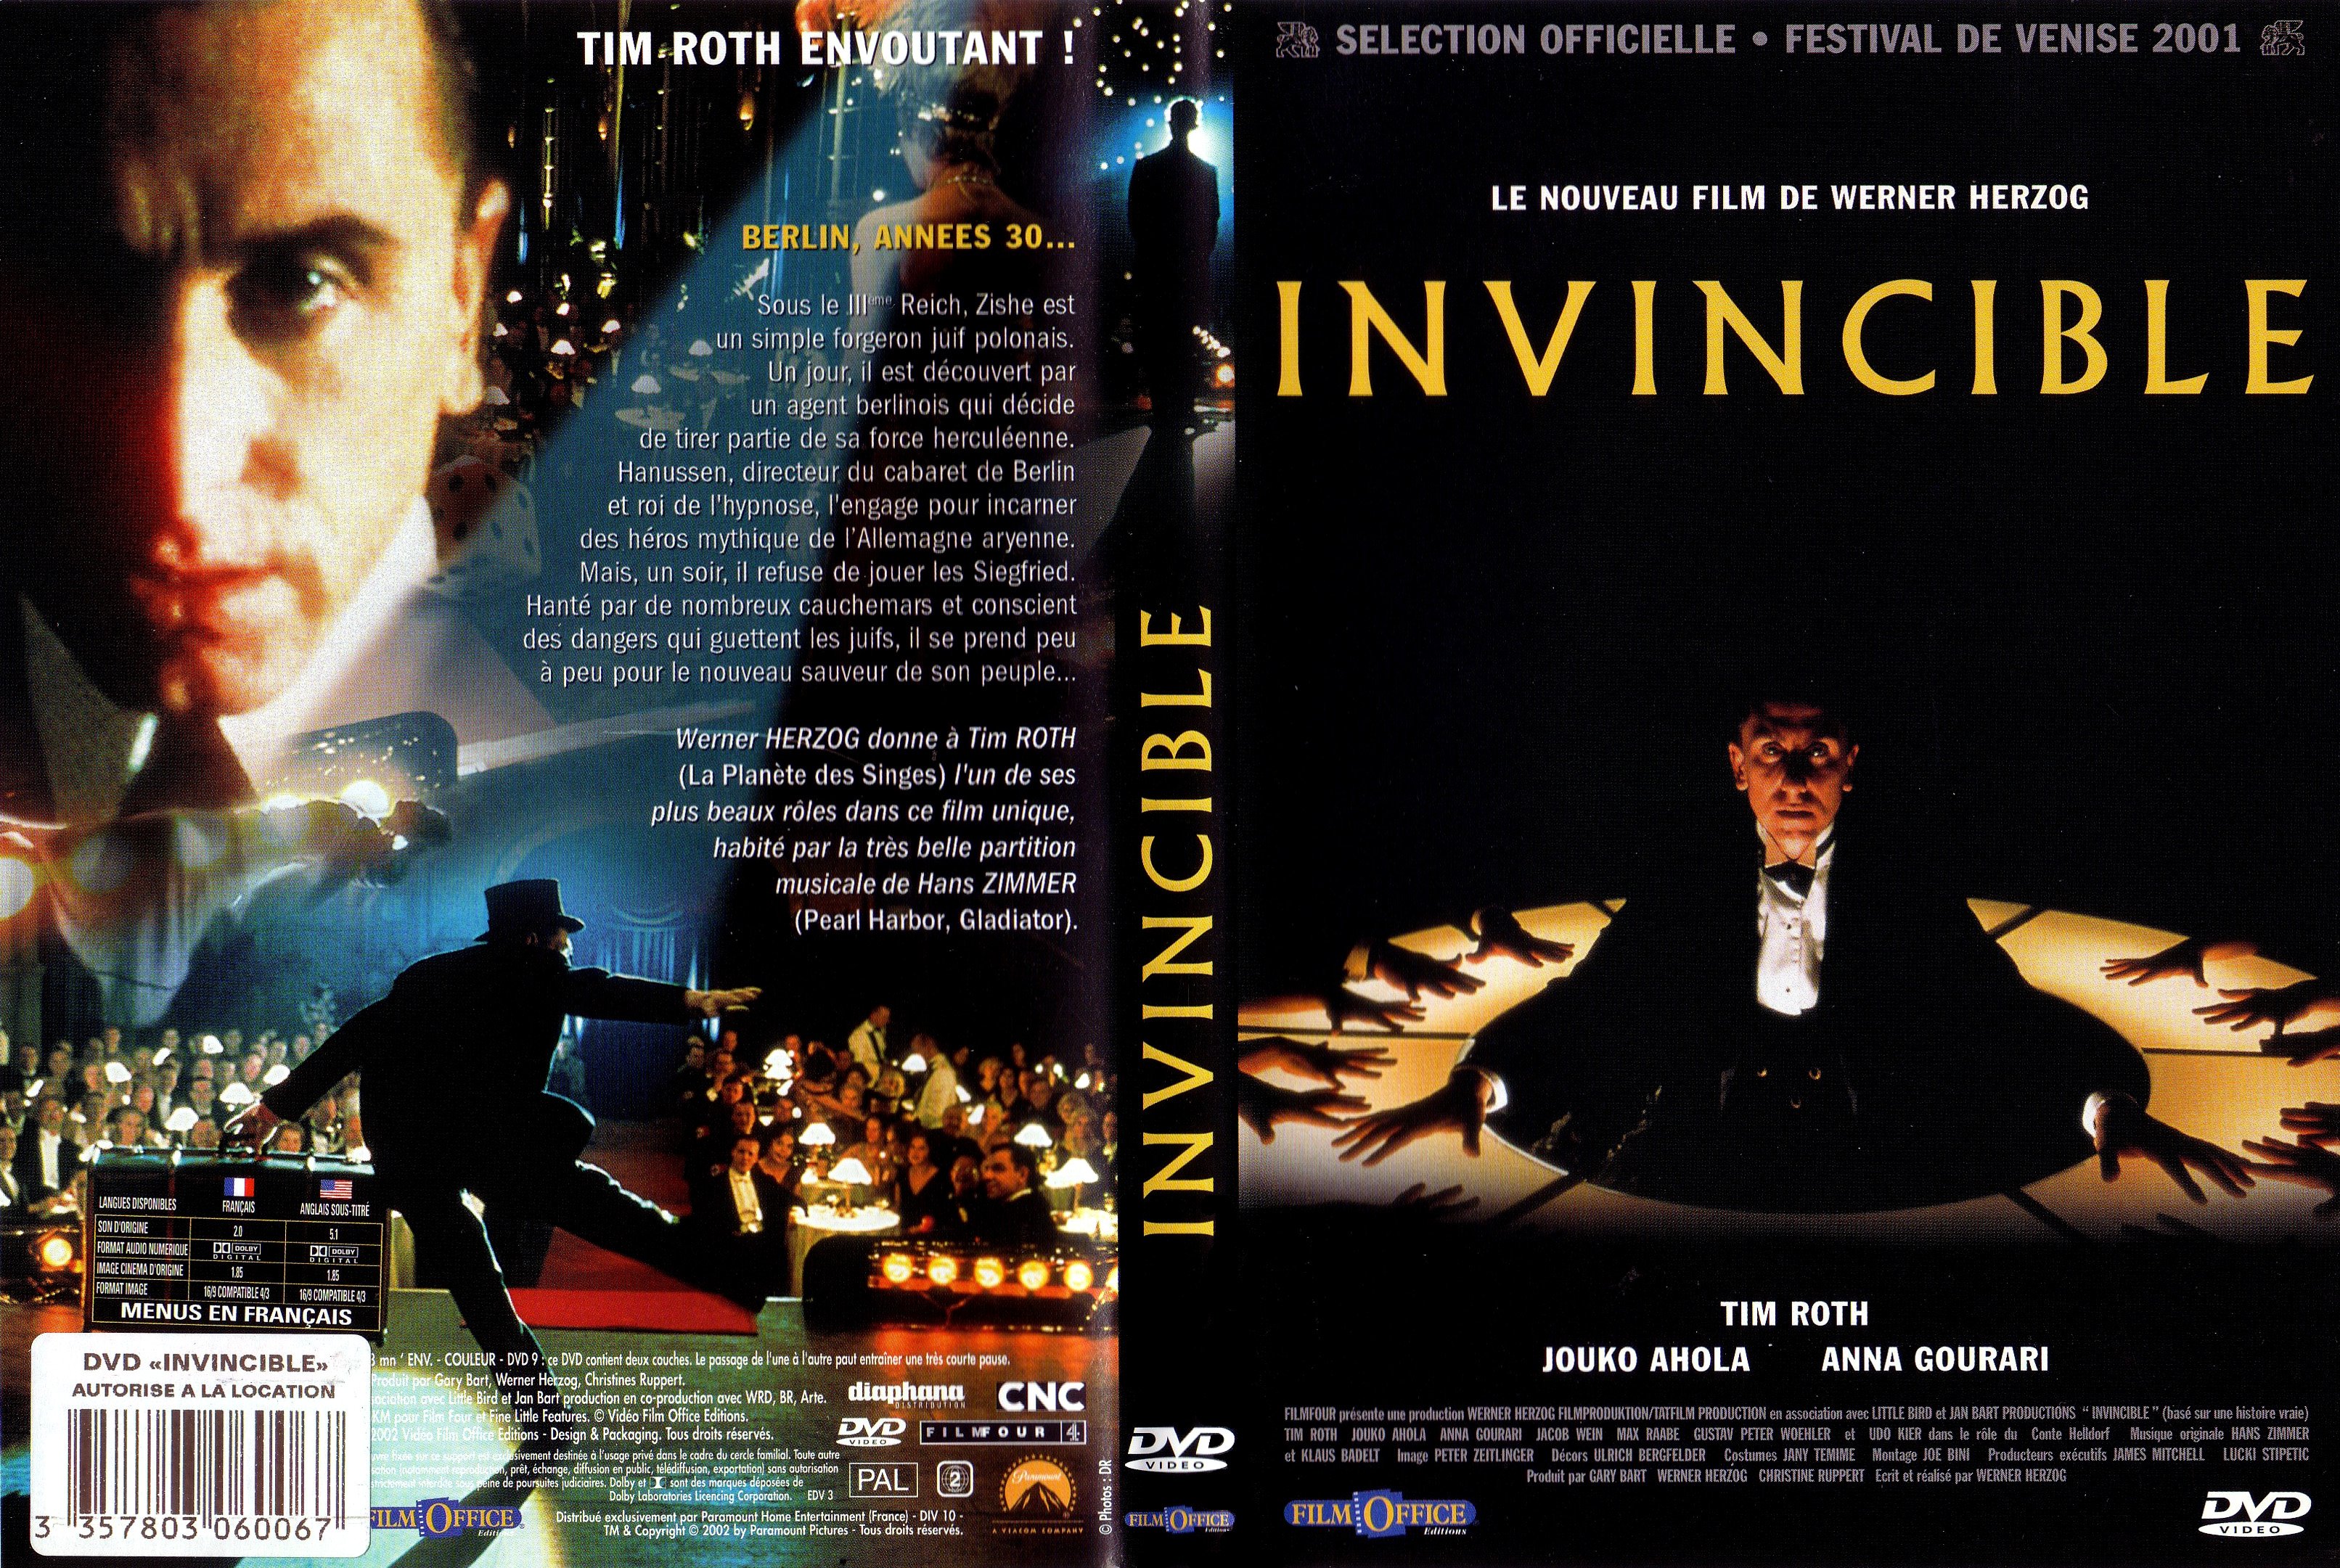 Jaquette DVD Invincible (Tim Roth)